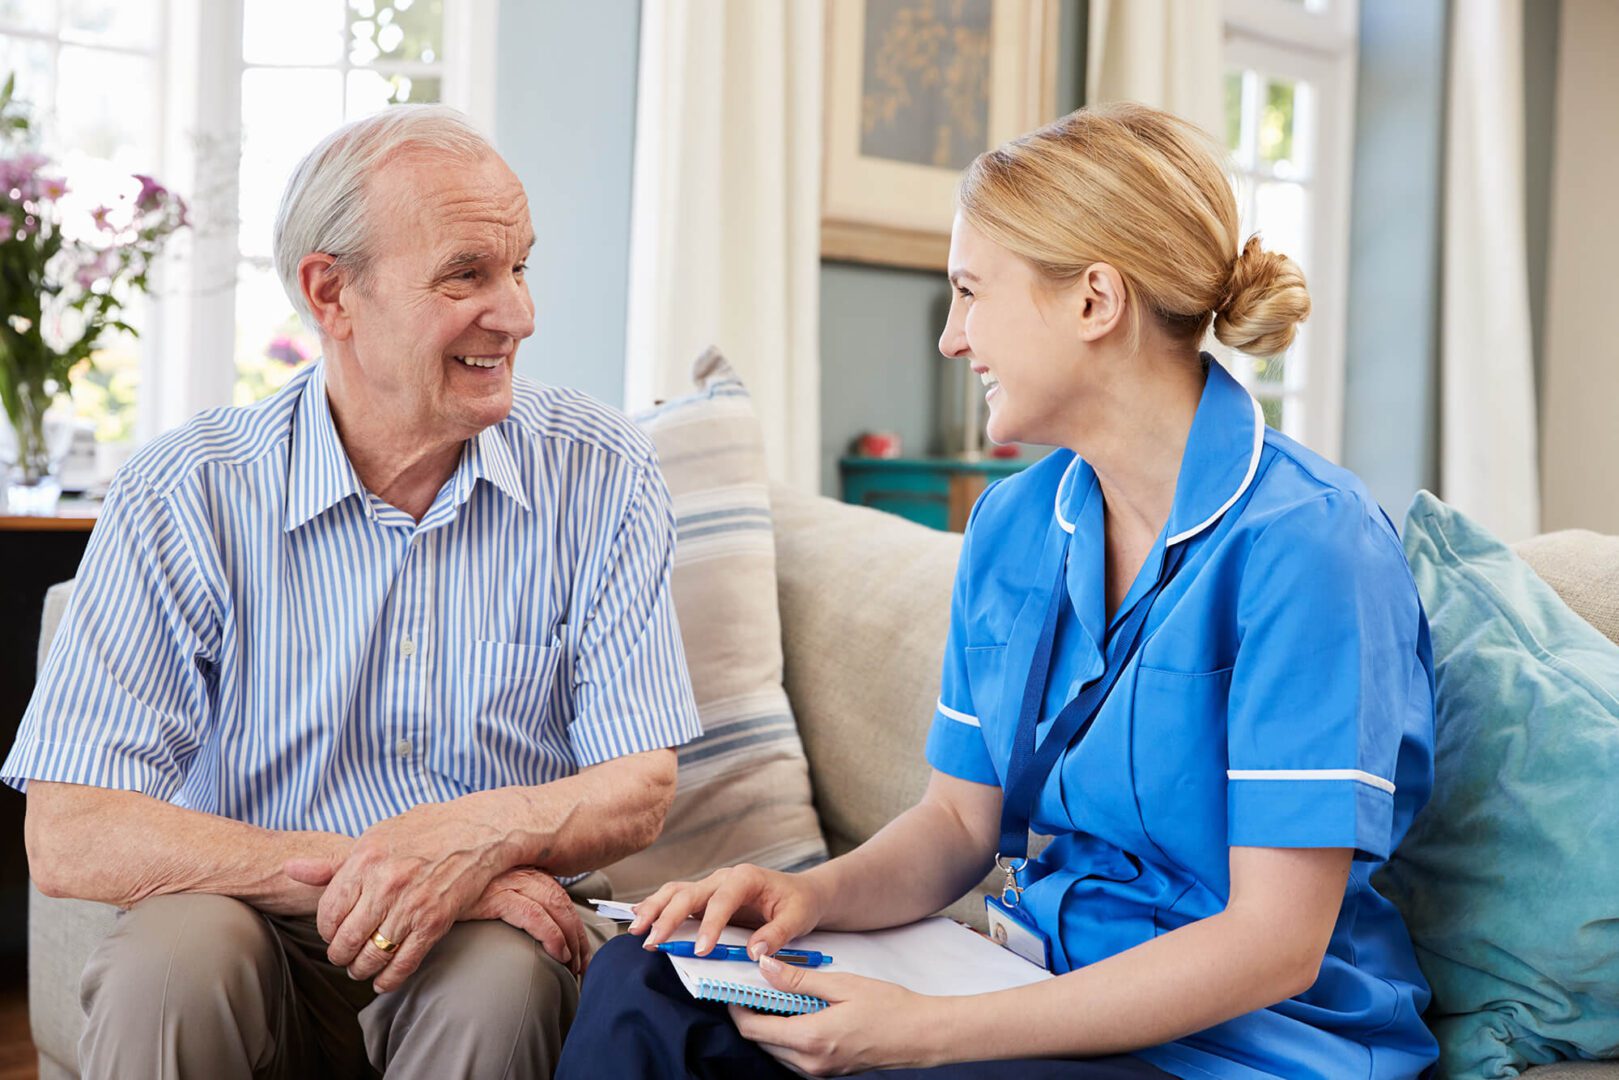 A Care Worker talking to an older man in blue shirt.